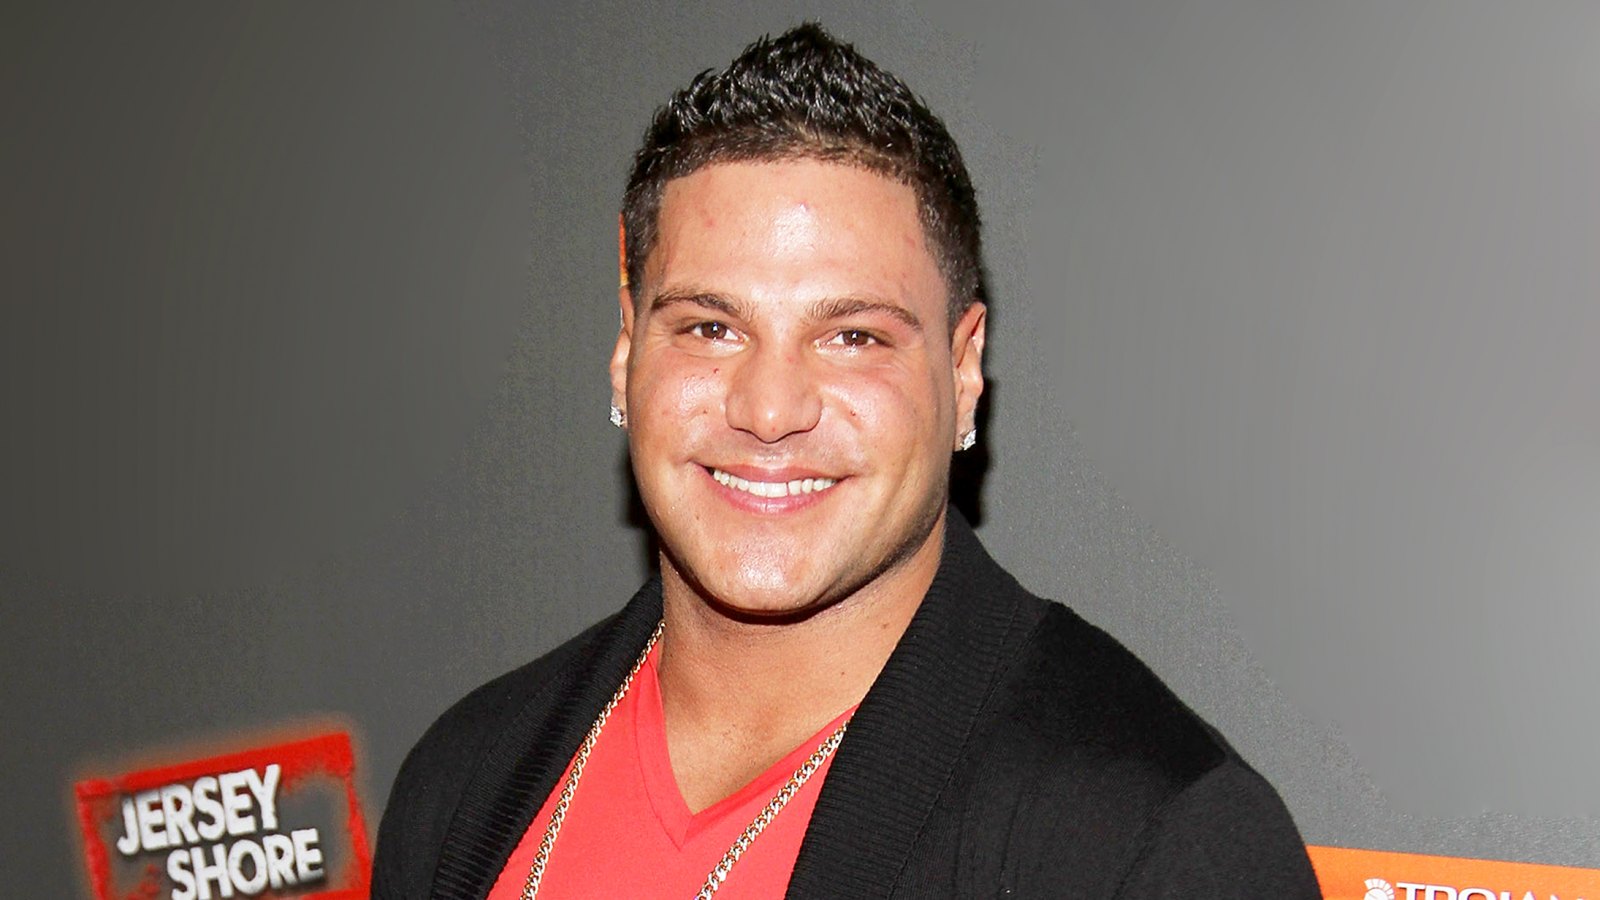 Ronnie Ortiz-Magro attends the "Jersey Shore" Final Season premiere at Bagatelle in New York City.